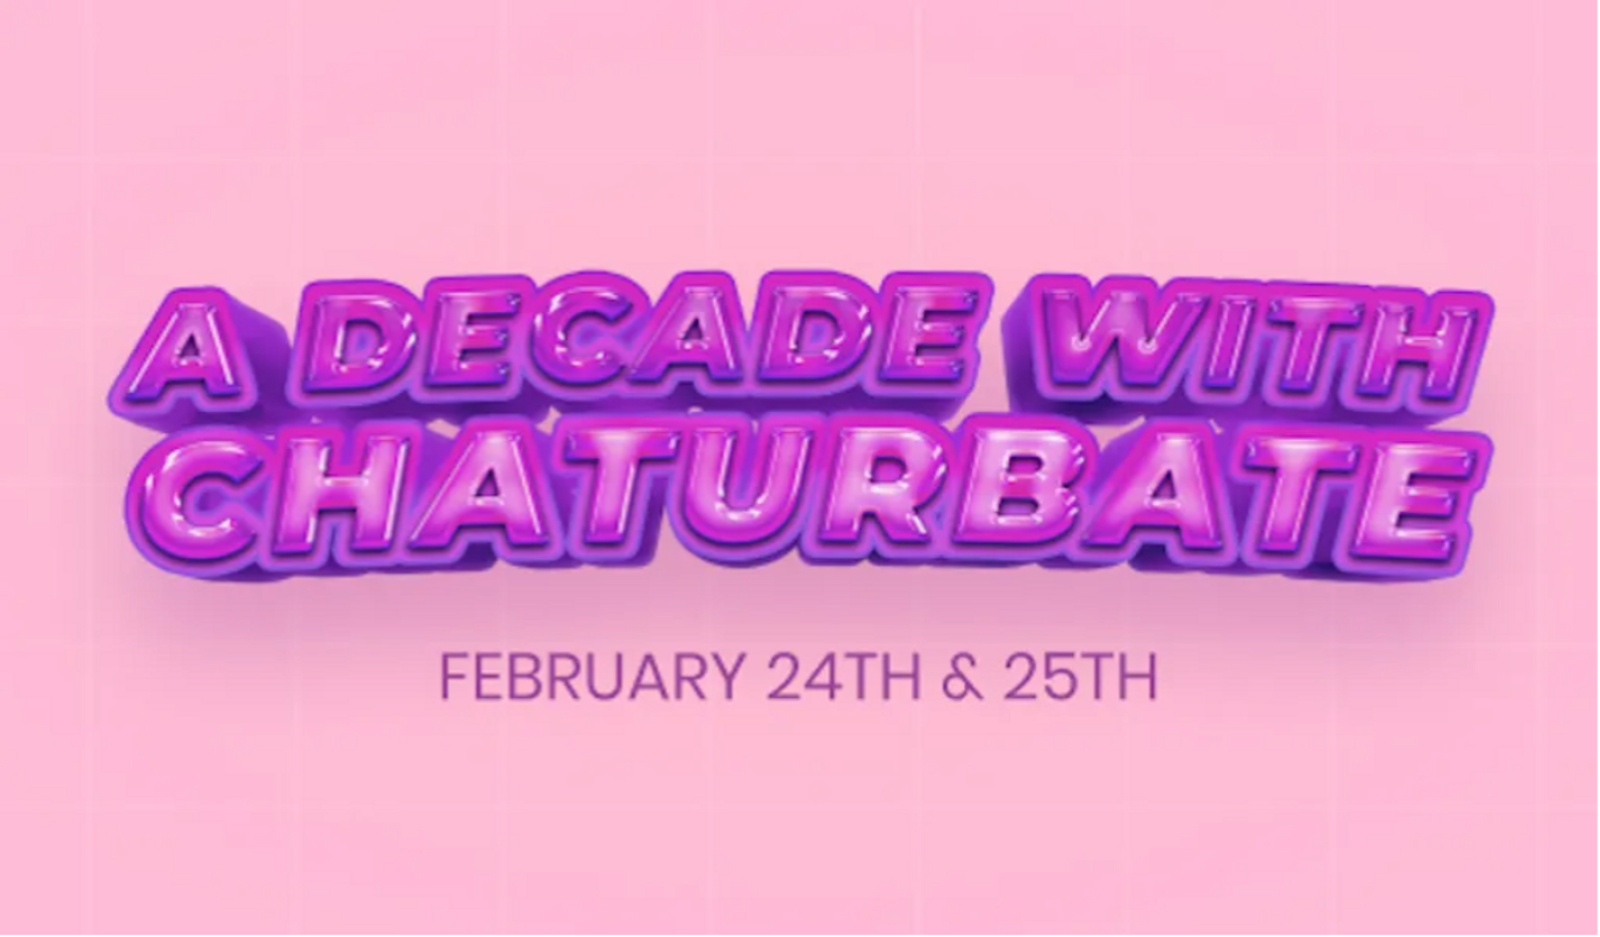 Chaturbate Announces Winners of 10-Year Anniversary Awards Show